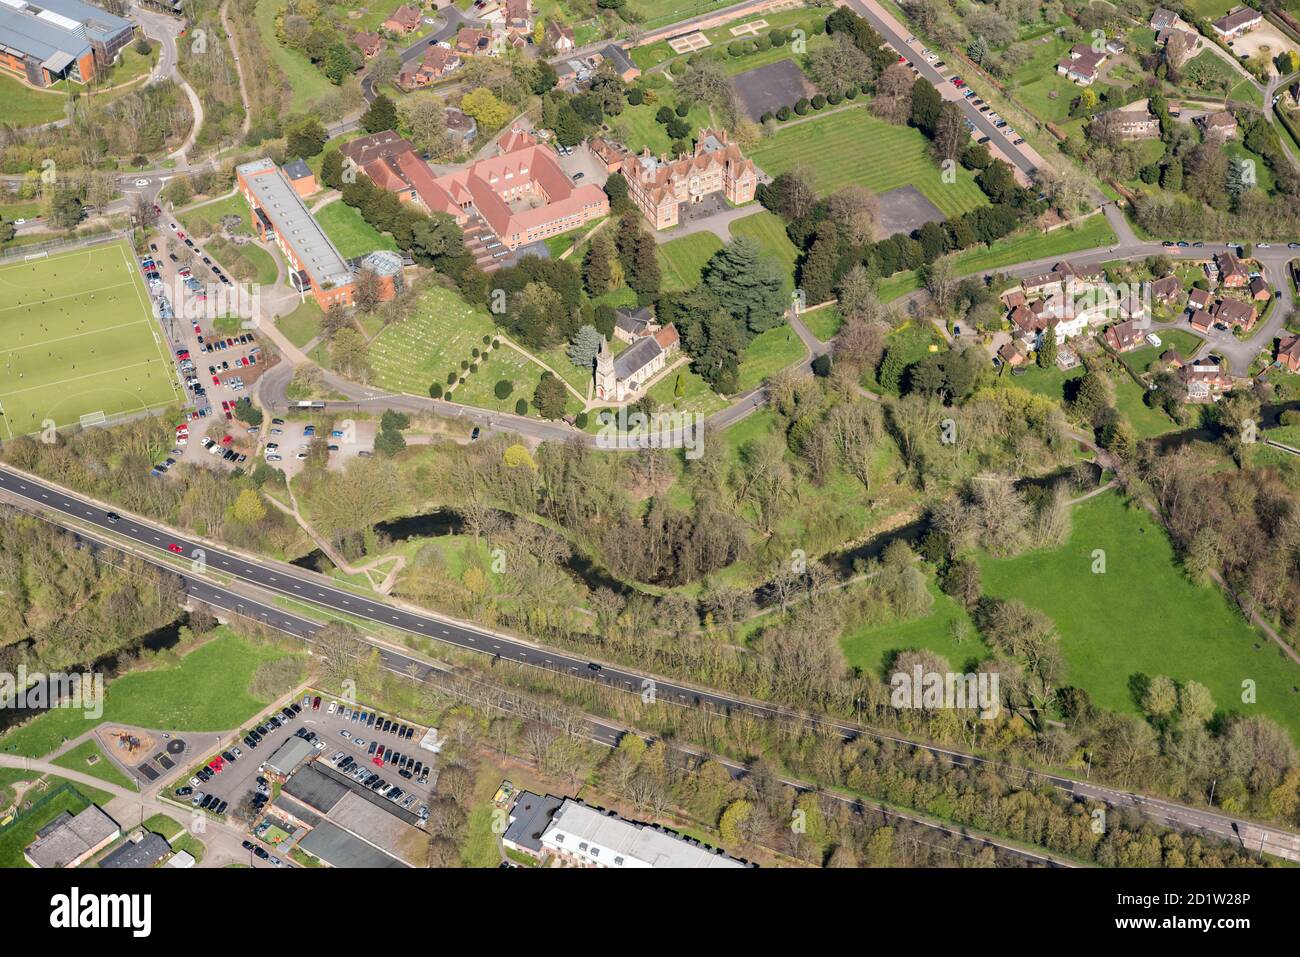 Park and garden at Shaw House which incorporates land at St Marys Church, Trinity School and the River Lambourne, Newbury, West Berkshire, UK. Aerial view. Stock Photo